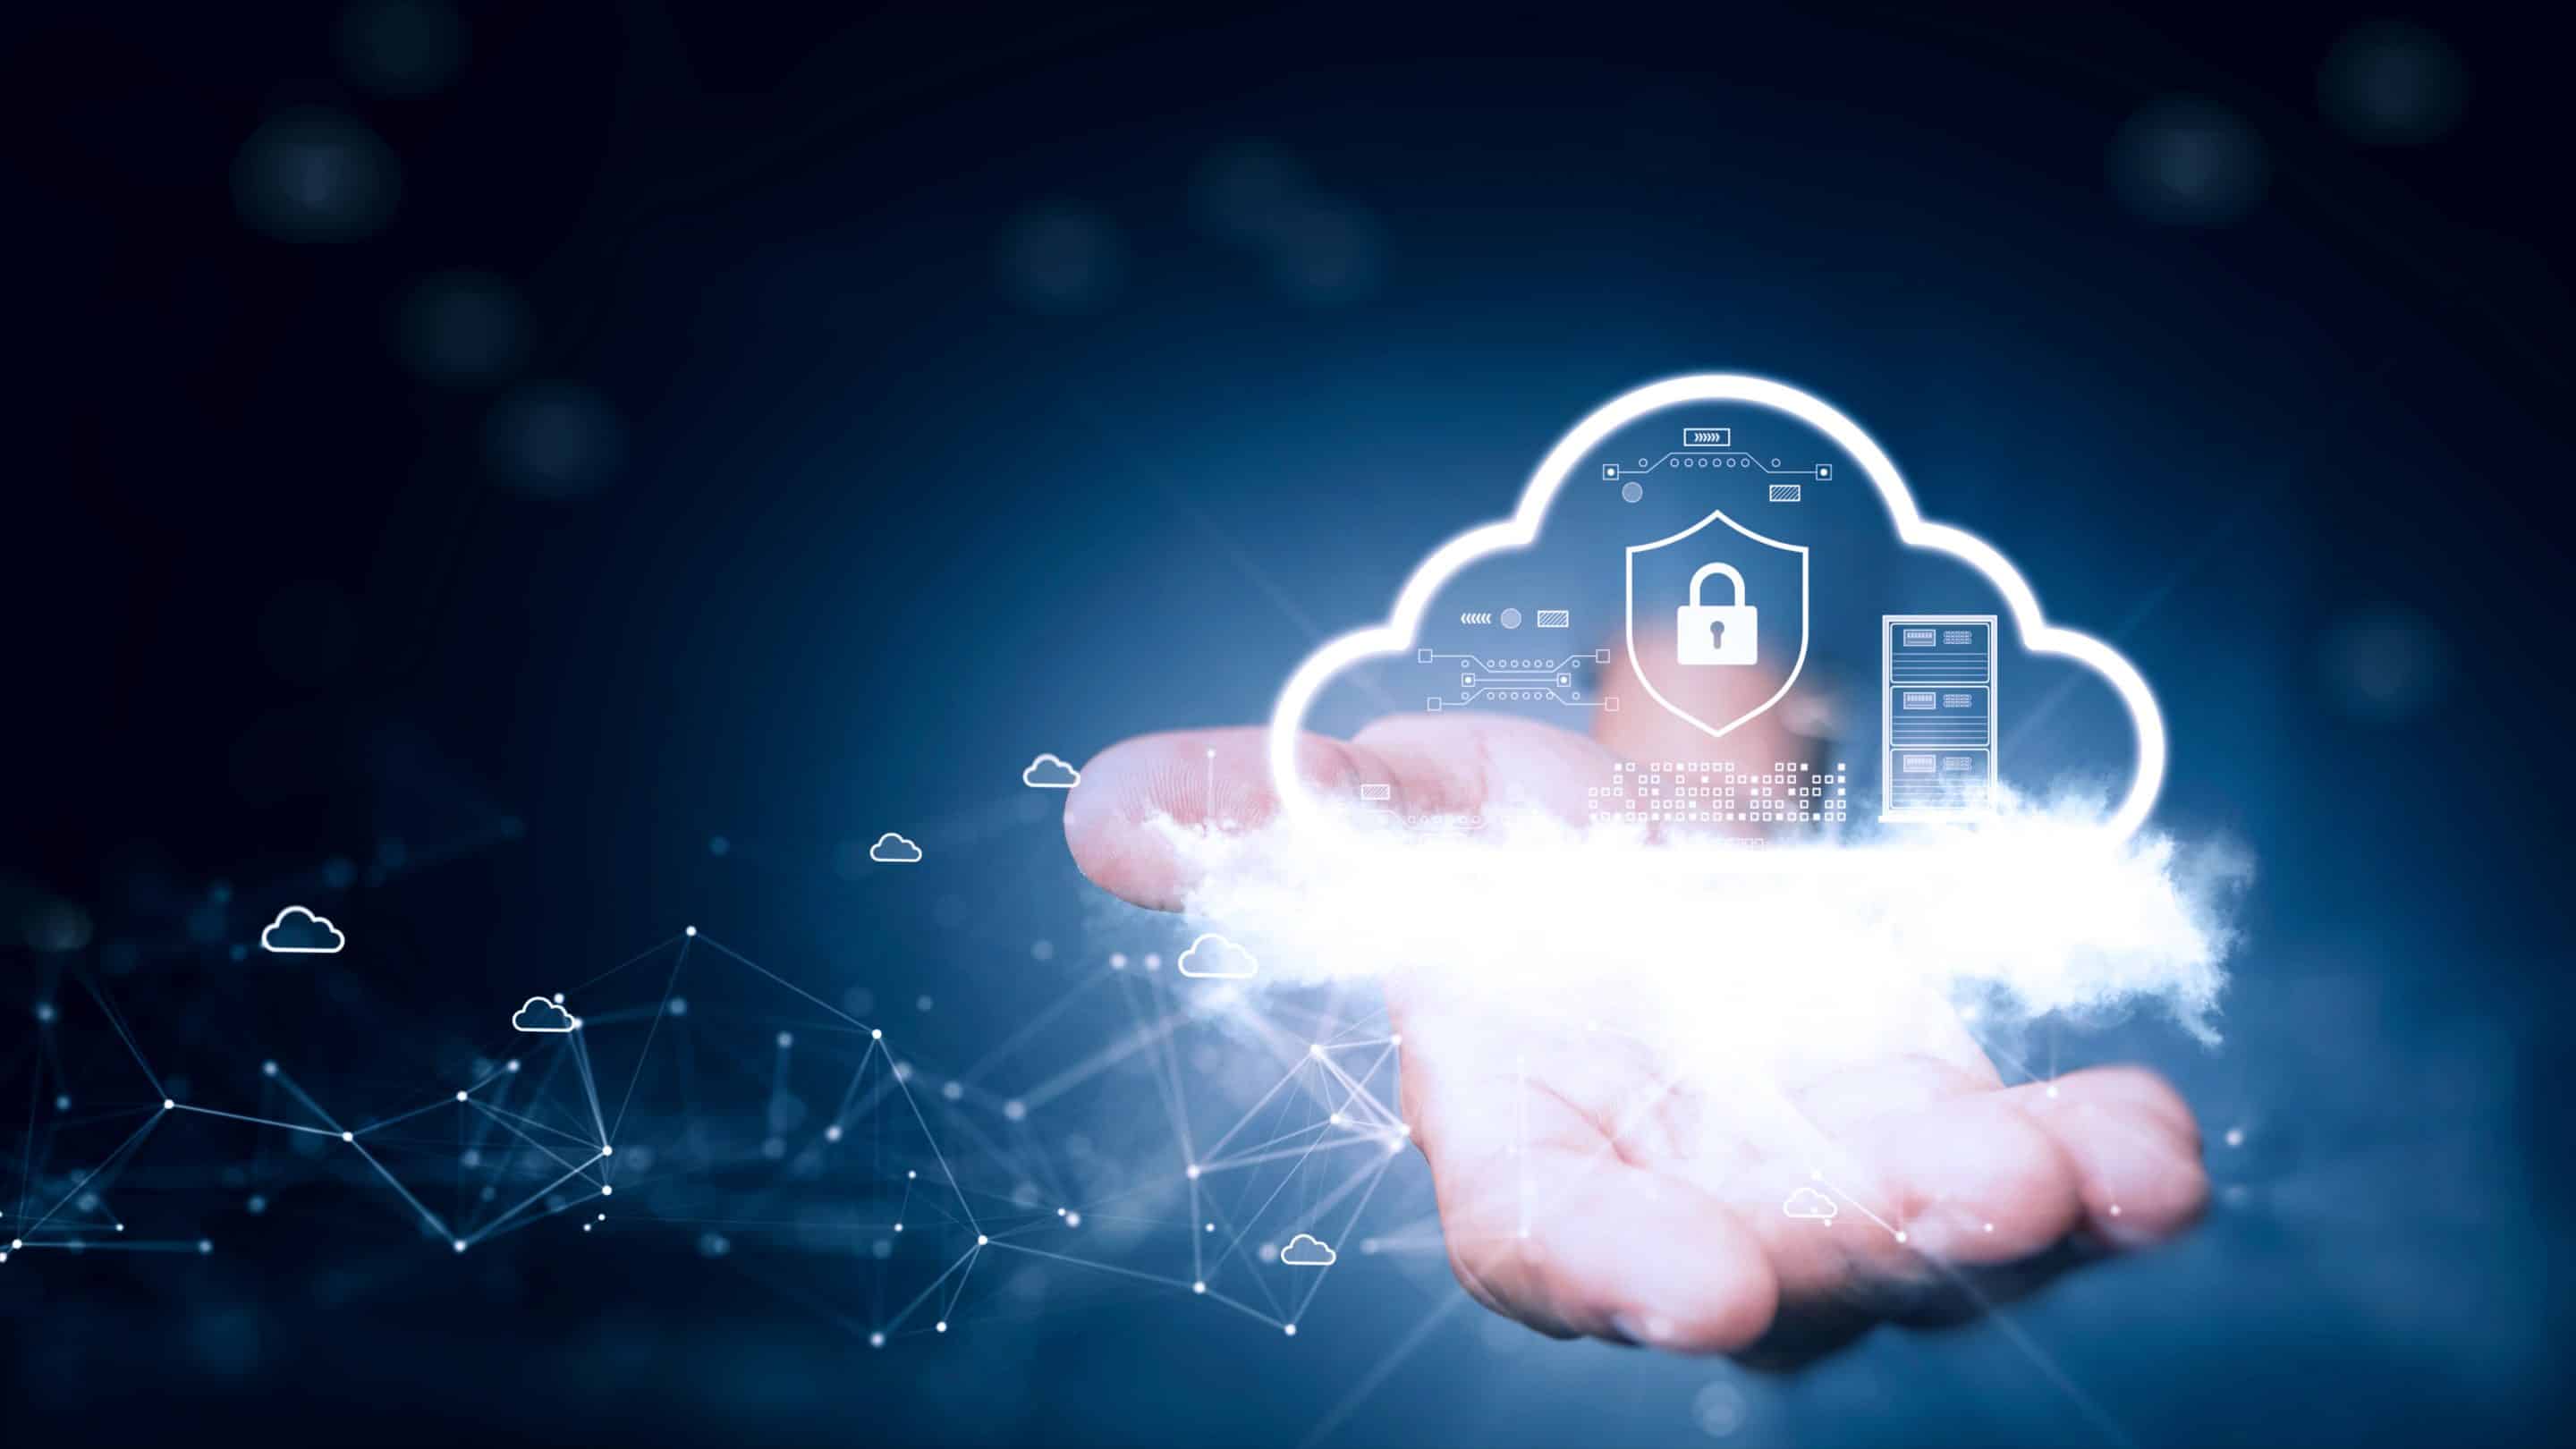 Cybersecurity Best Practices for Cloud Environments